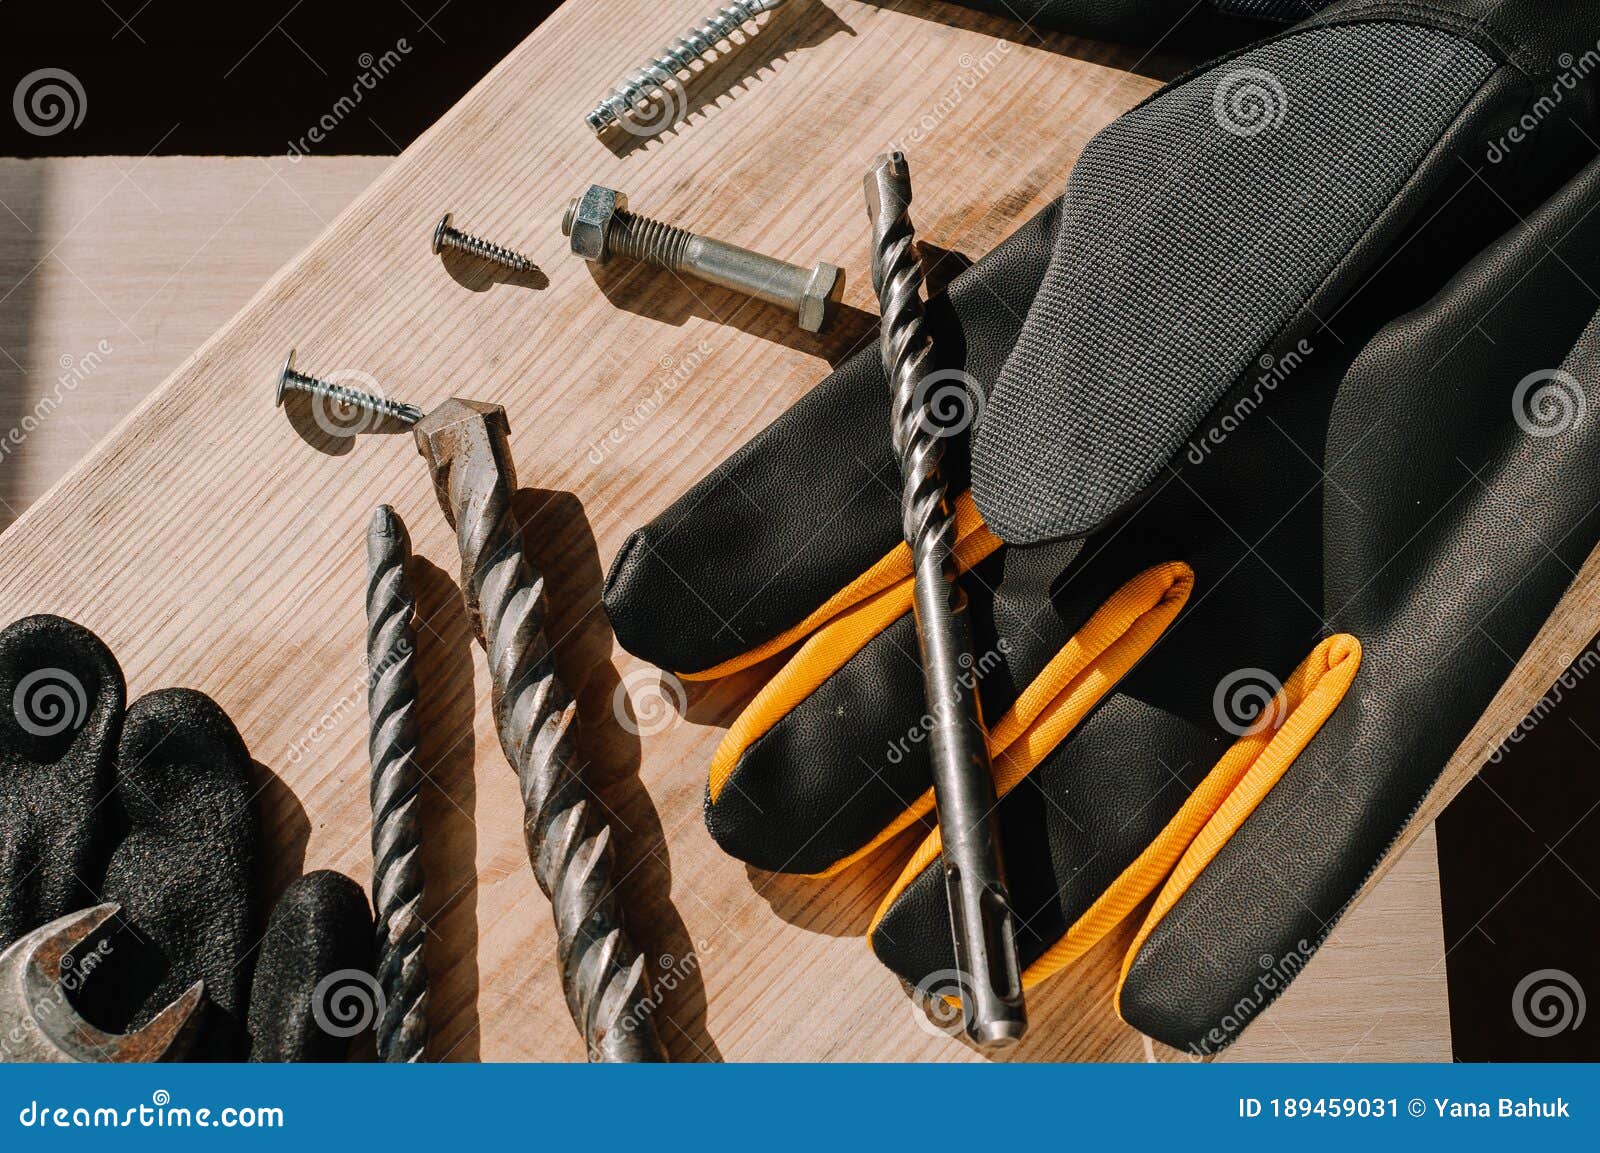 building tools including centimeter ruler, wrench and cutter placed in the right side on wooden surface with open space.